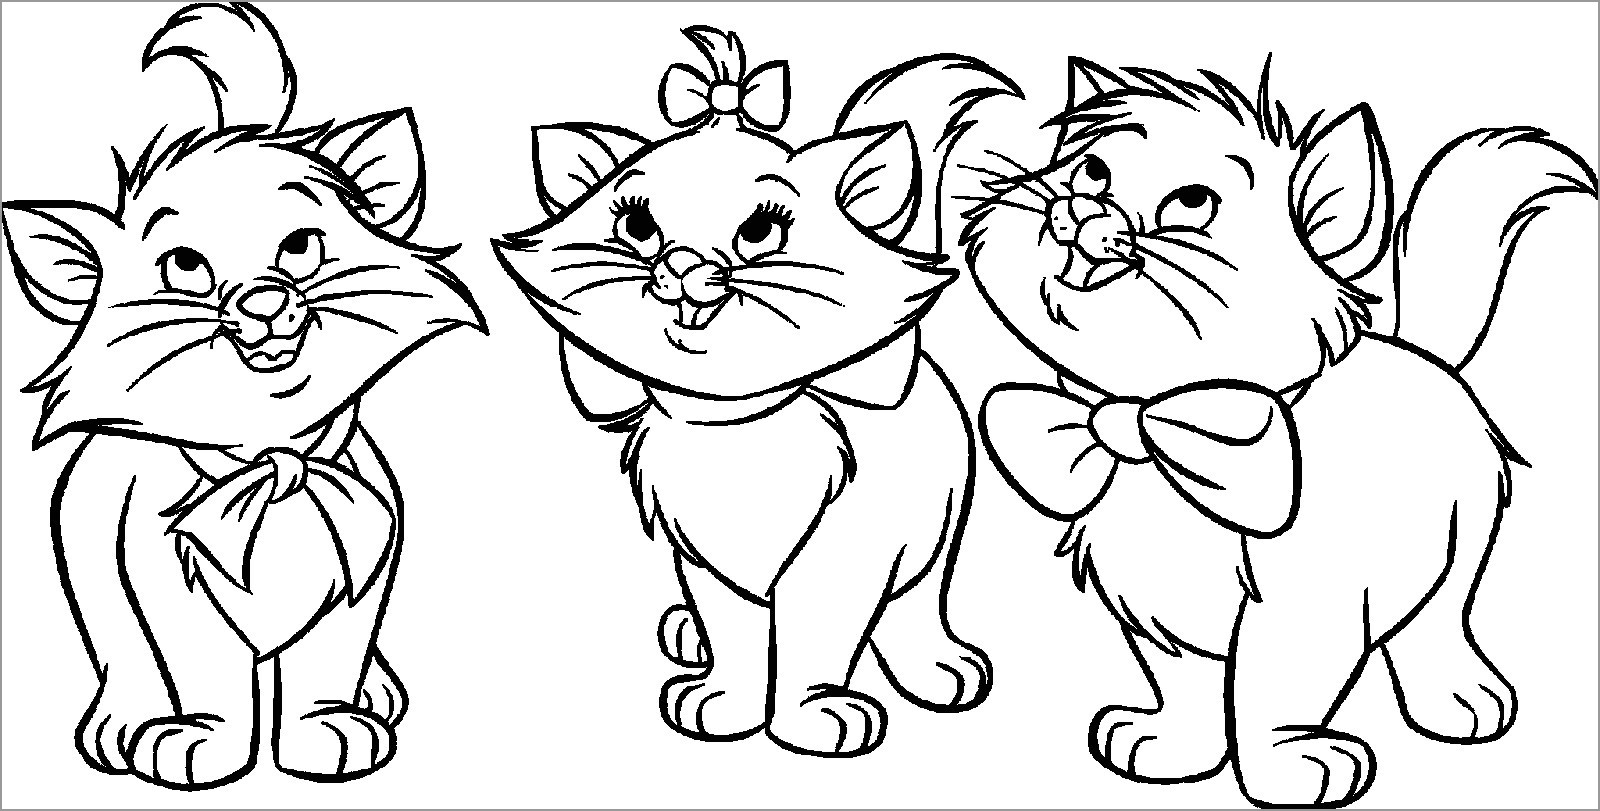 Easy Kitten Coloring Pages